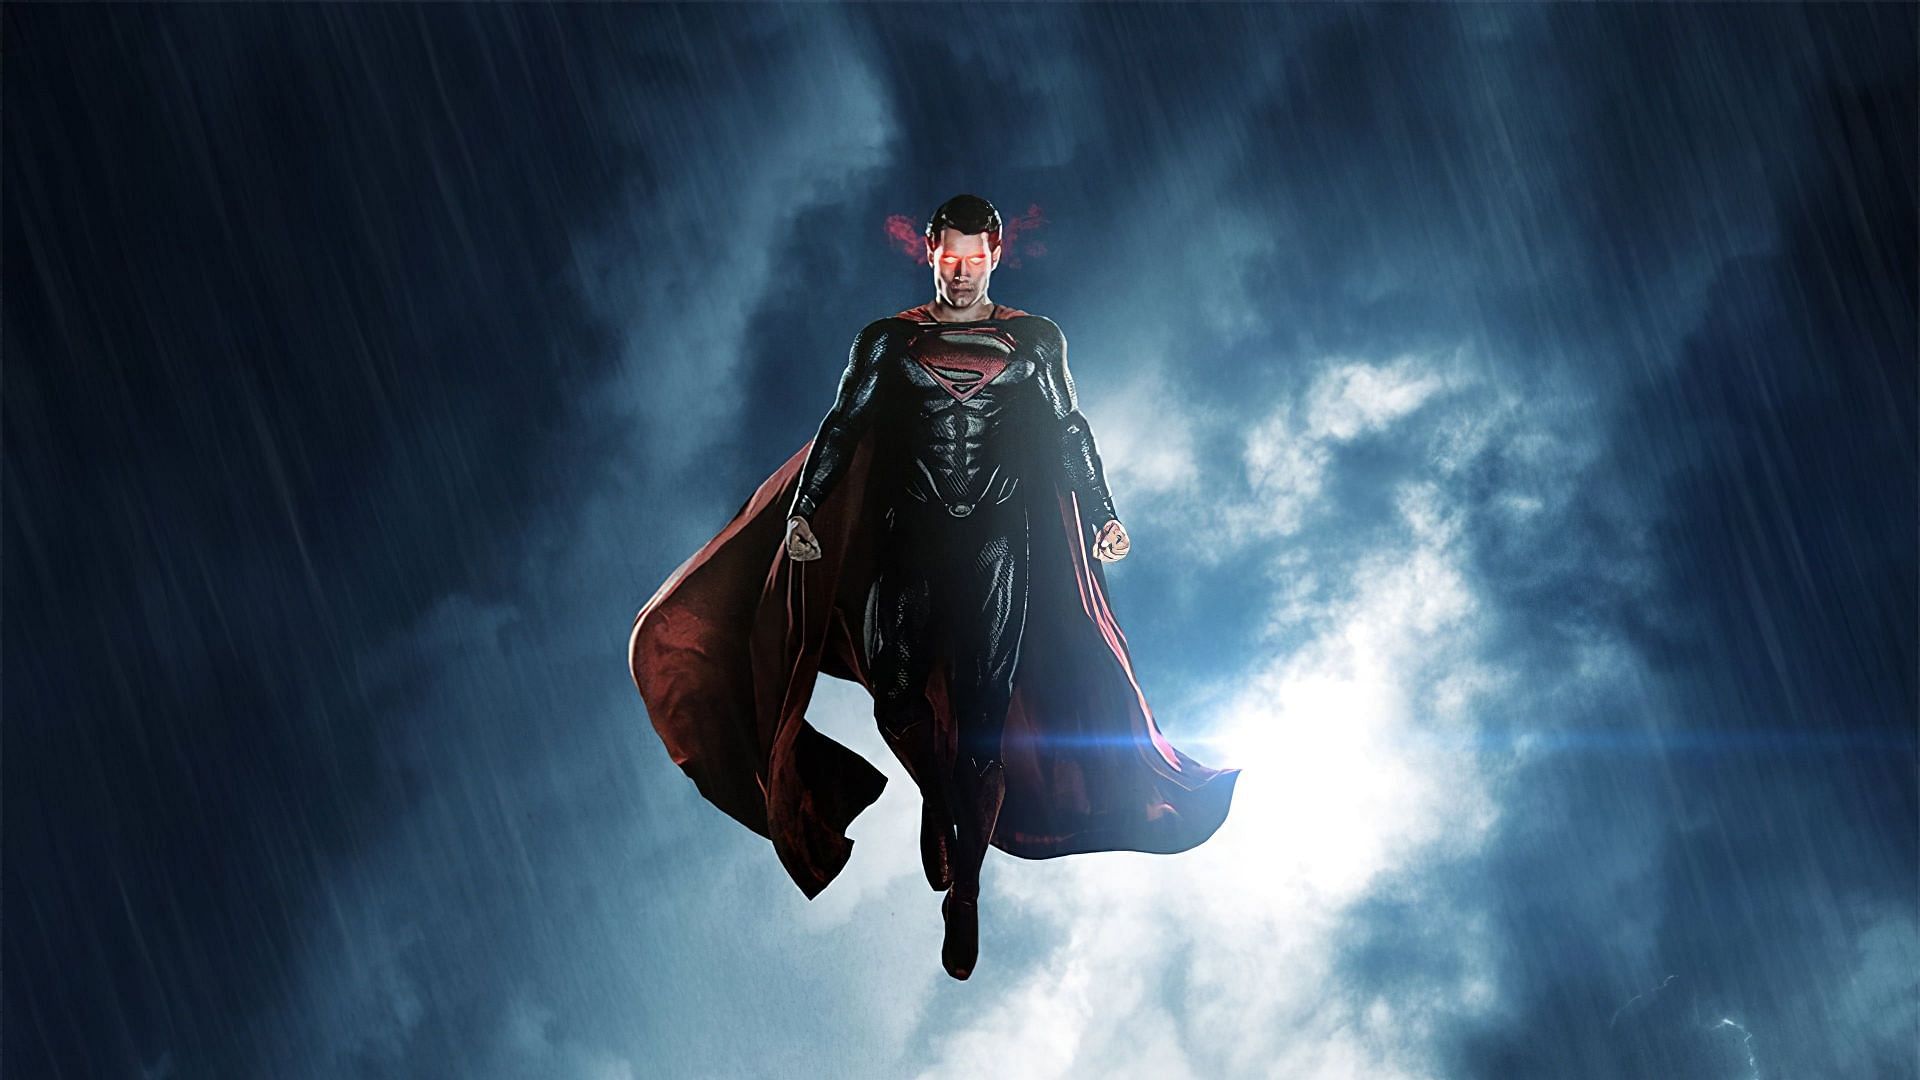 Superman is the powerhouse of the team and the most formidable opponent of any foe. (Image via DC Universe)